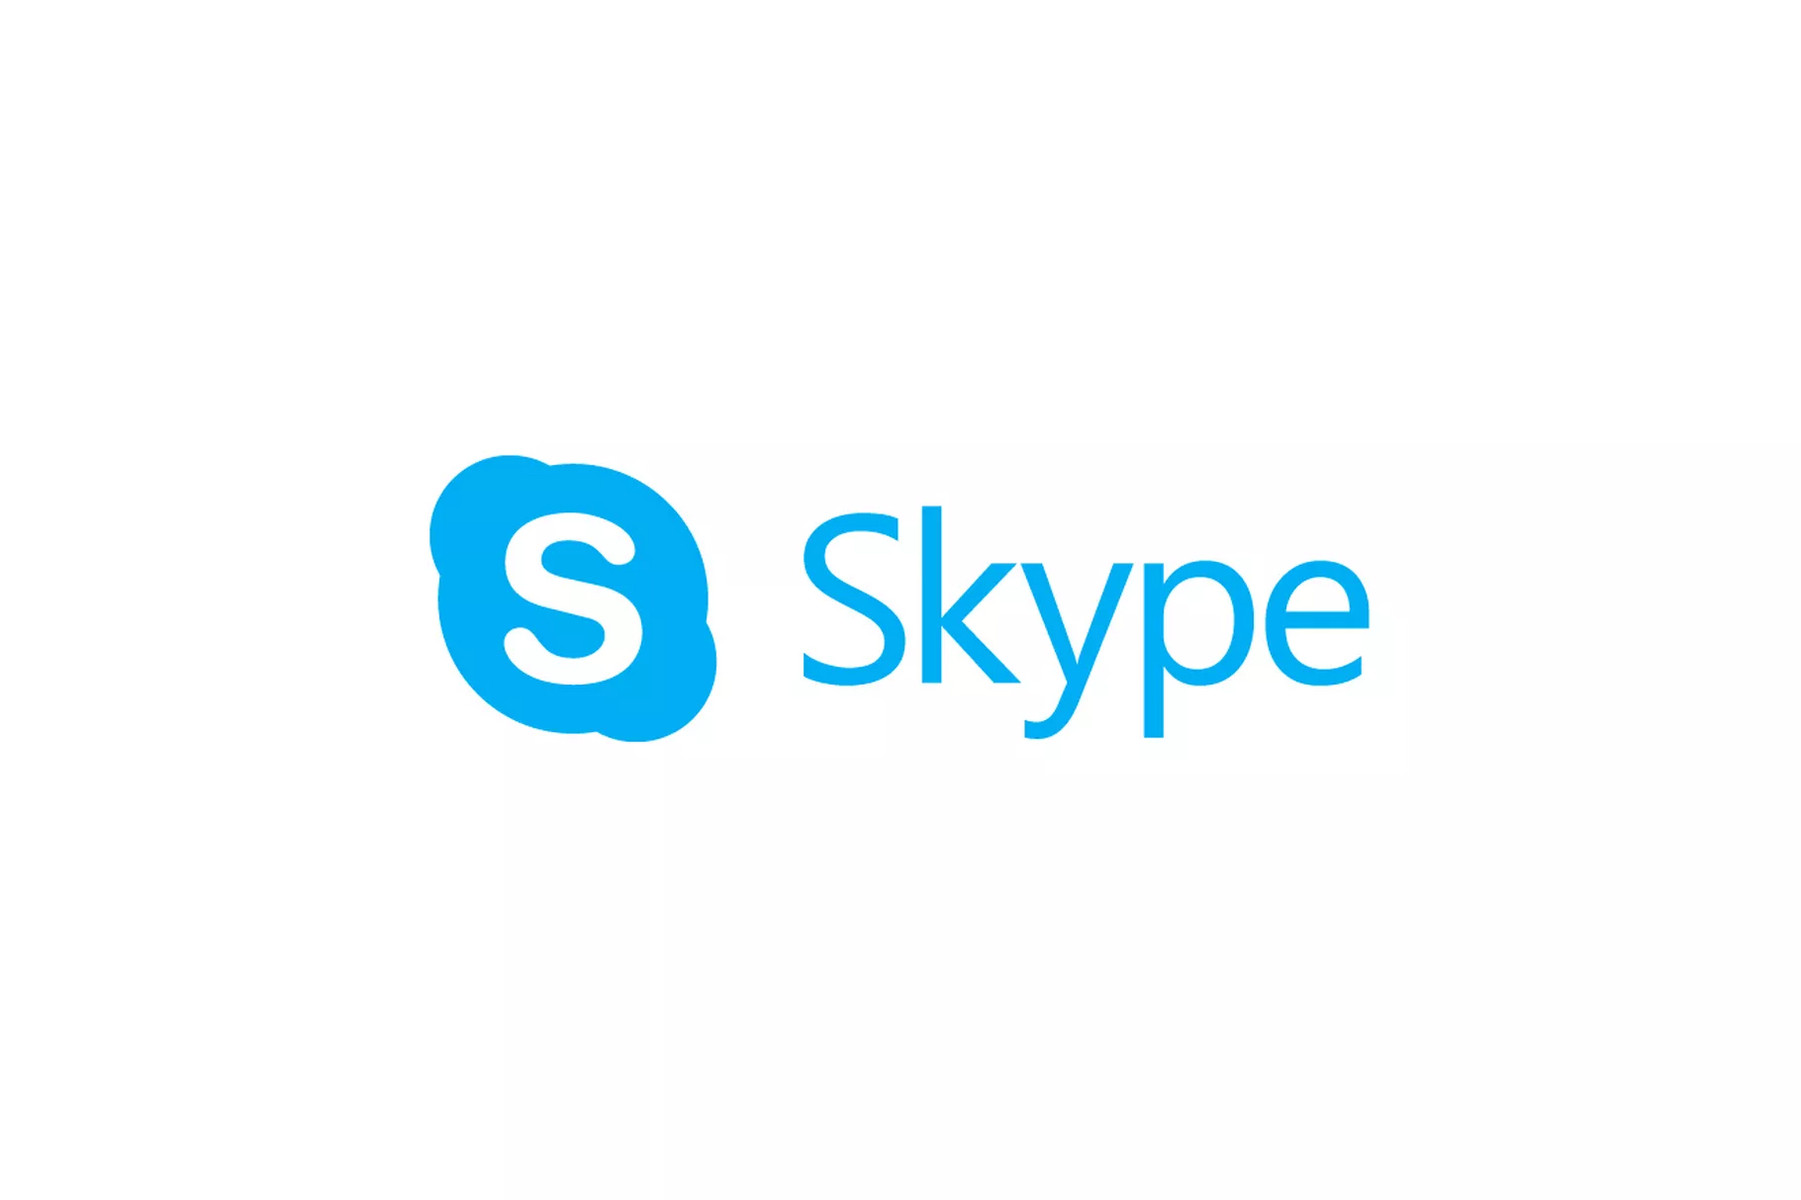 Microsoft will remove option to sign in to Skype using Facebook account ...